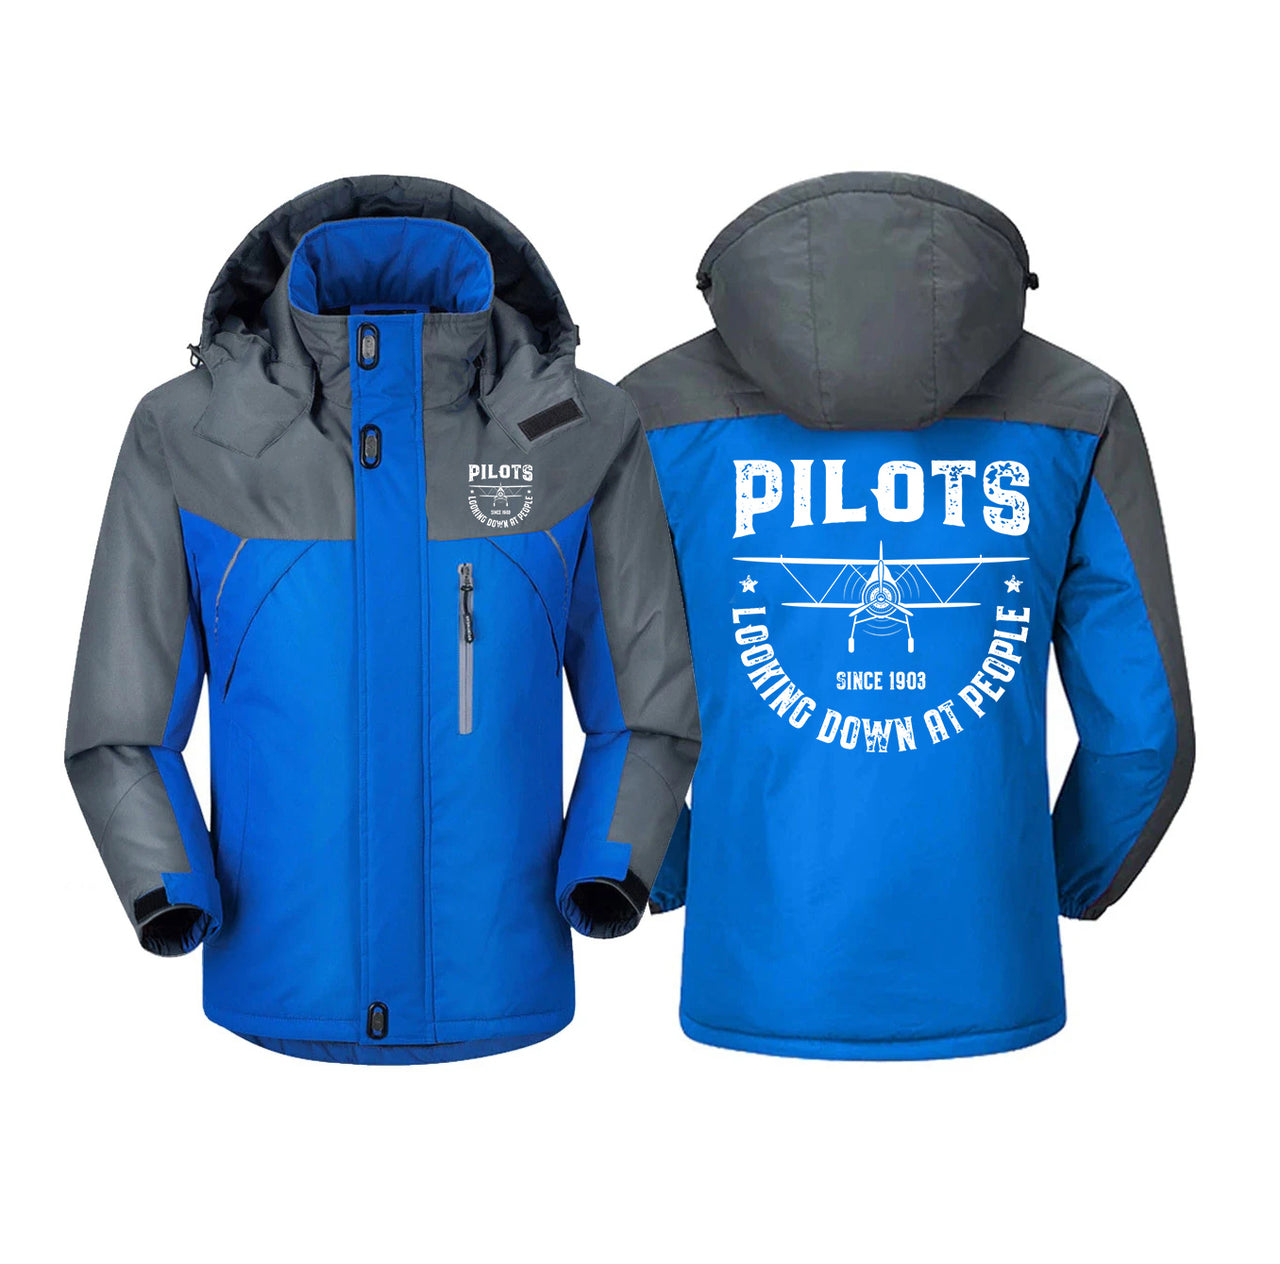 Pilots Looking Down at People Since 1903 Designed Thick Winter Jackets